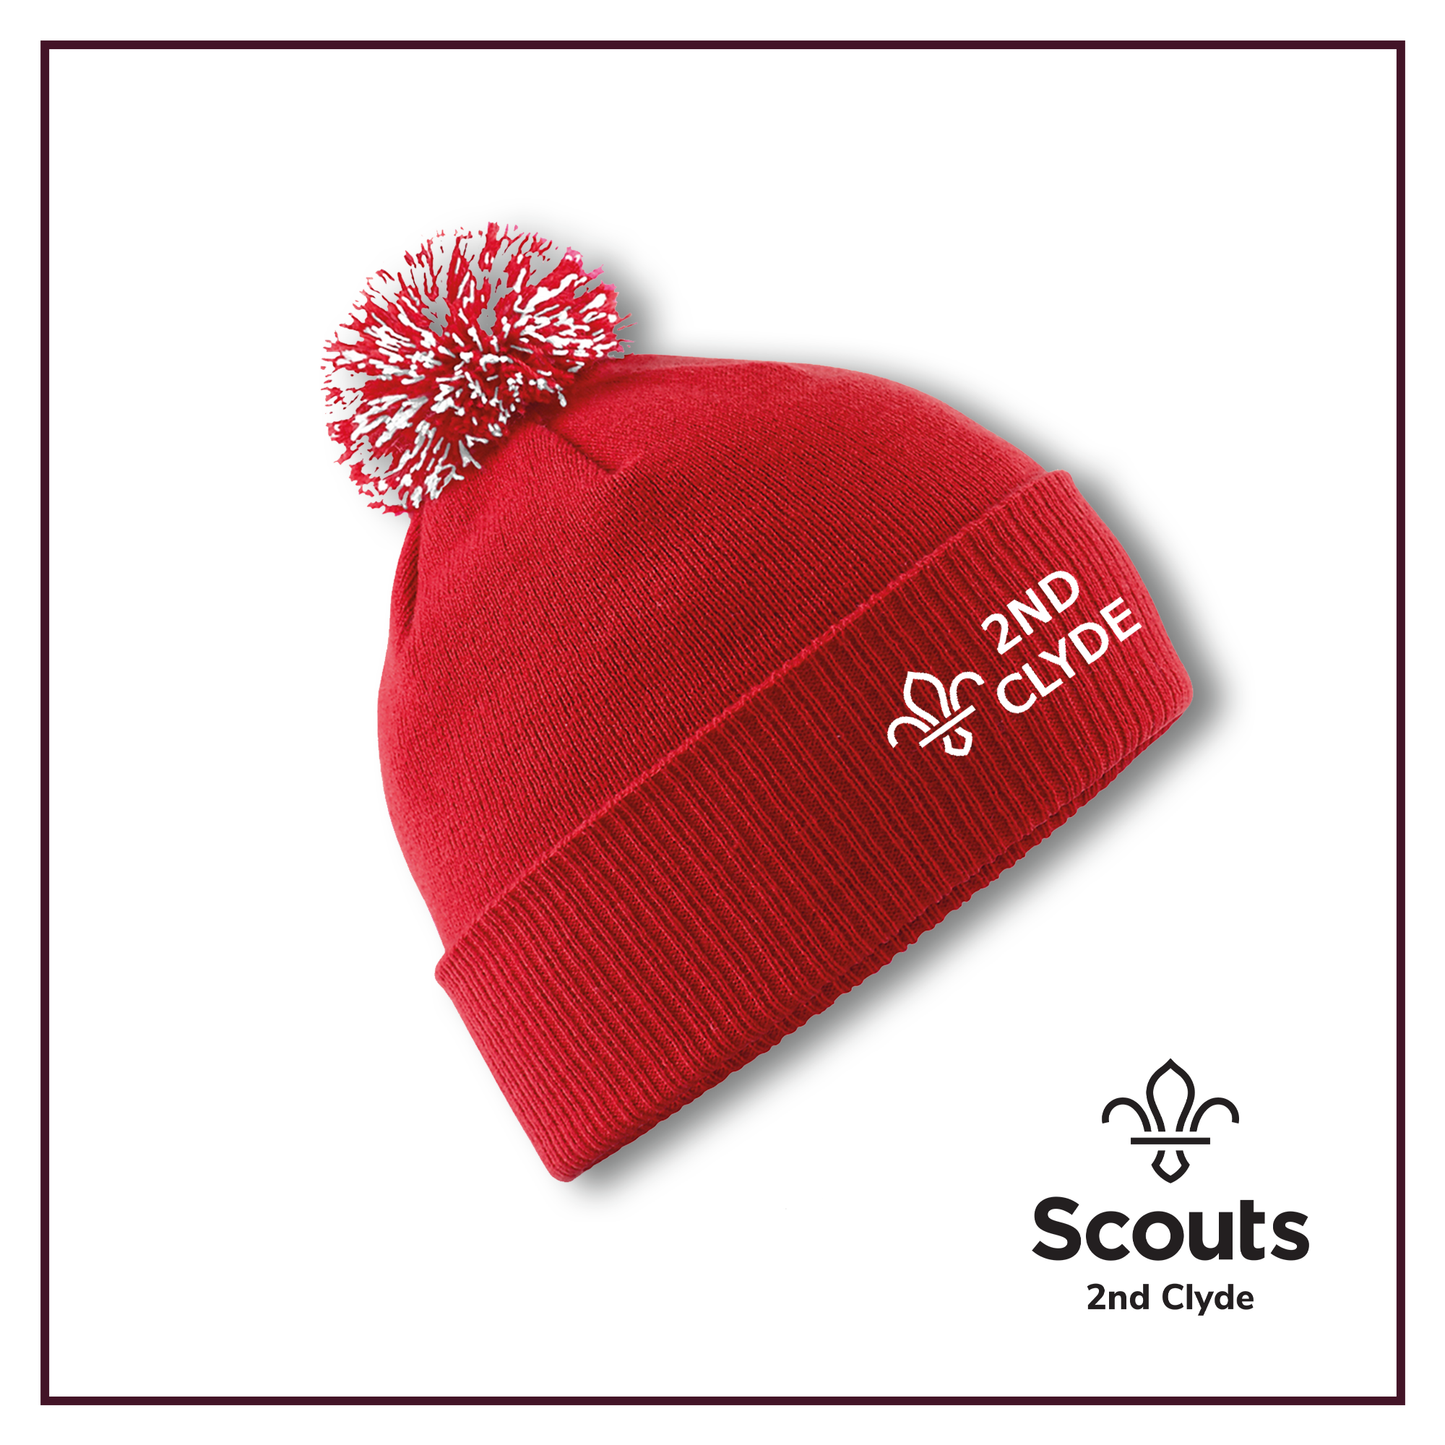 2nd Clyde Scouts - Embroidered Pom-Pom Beanie